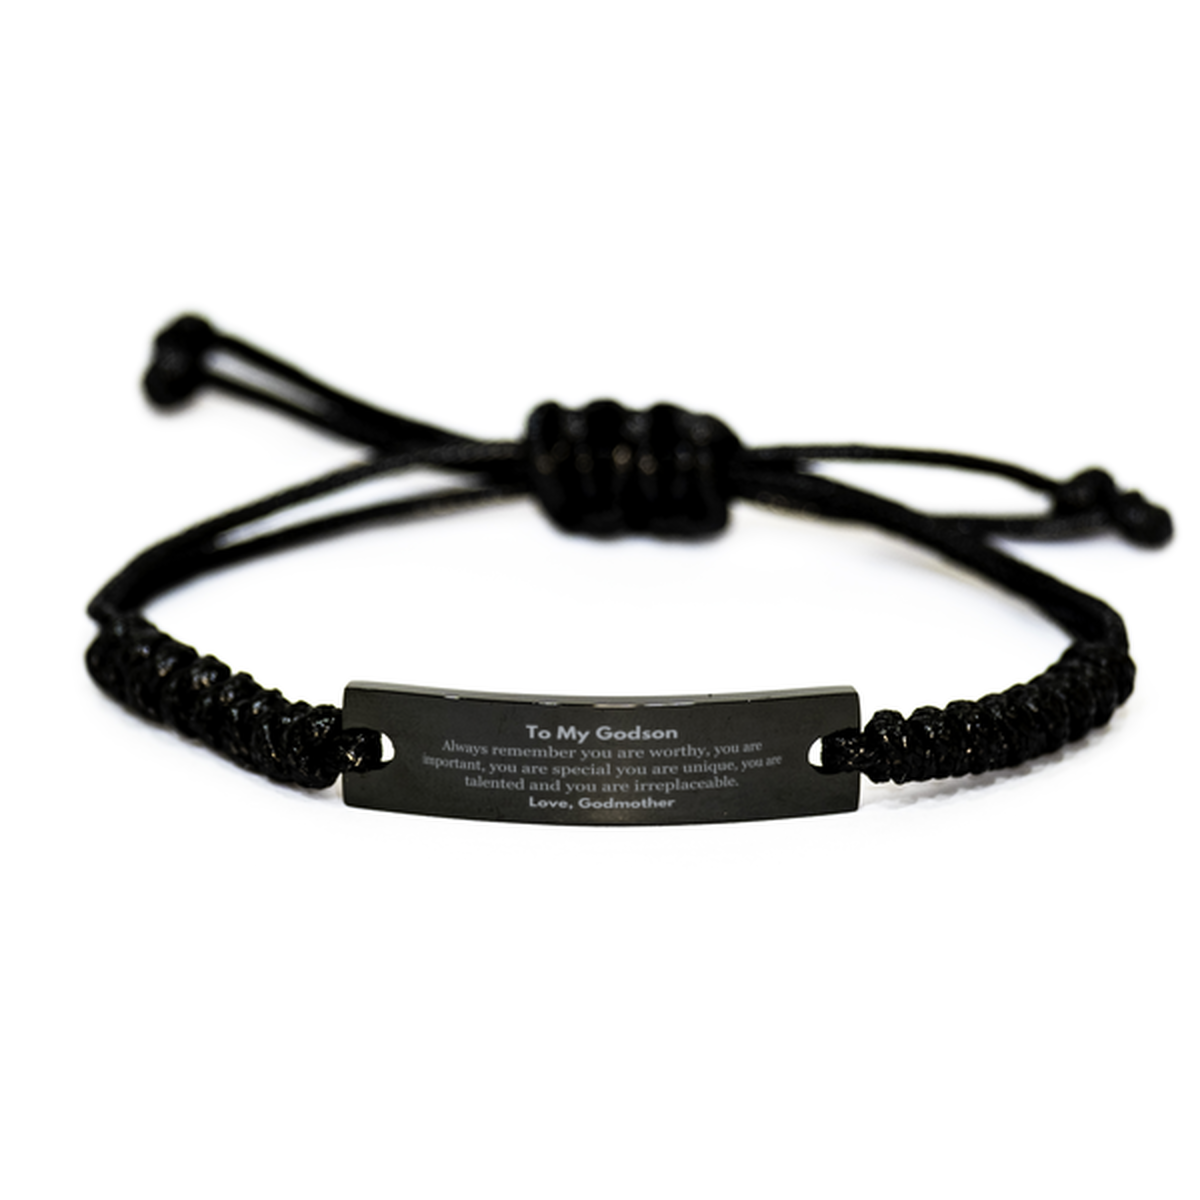 Godson Birthday Gifts from Godmother, Inspirational Black Rope Bracelet for Godson Christmas Graduation Gifts for Godson Always remember you are worthy, you are important. Love, Godmother